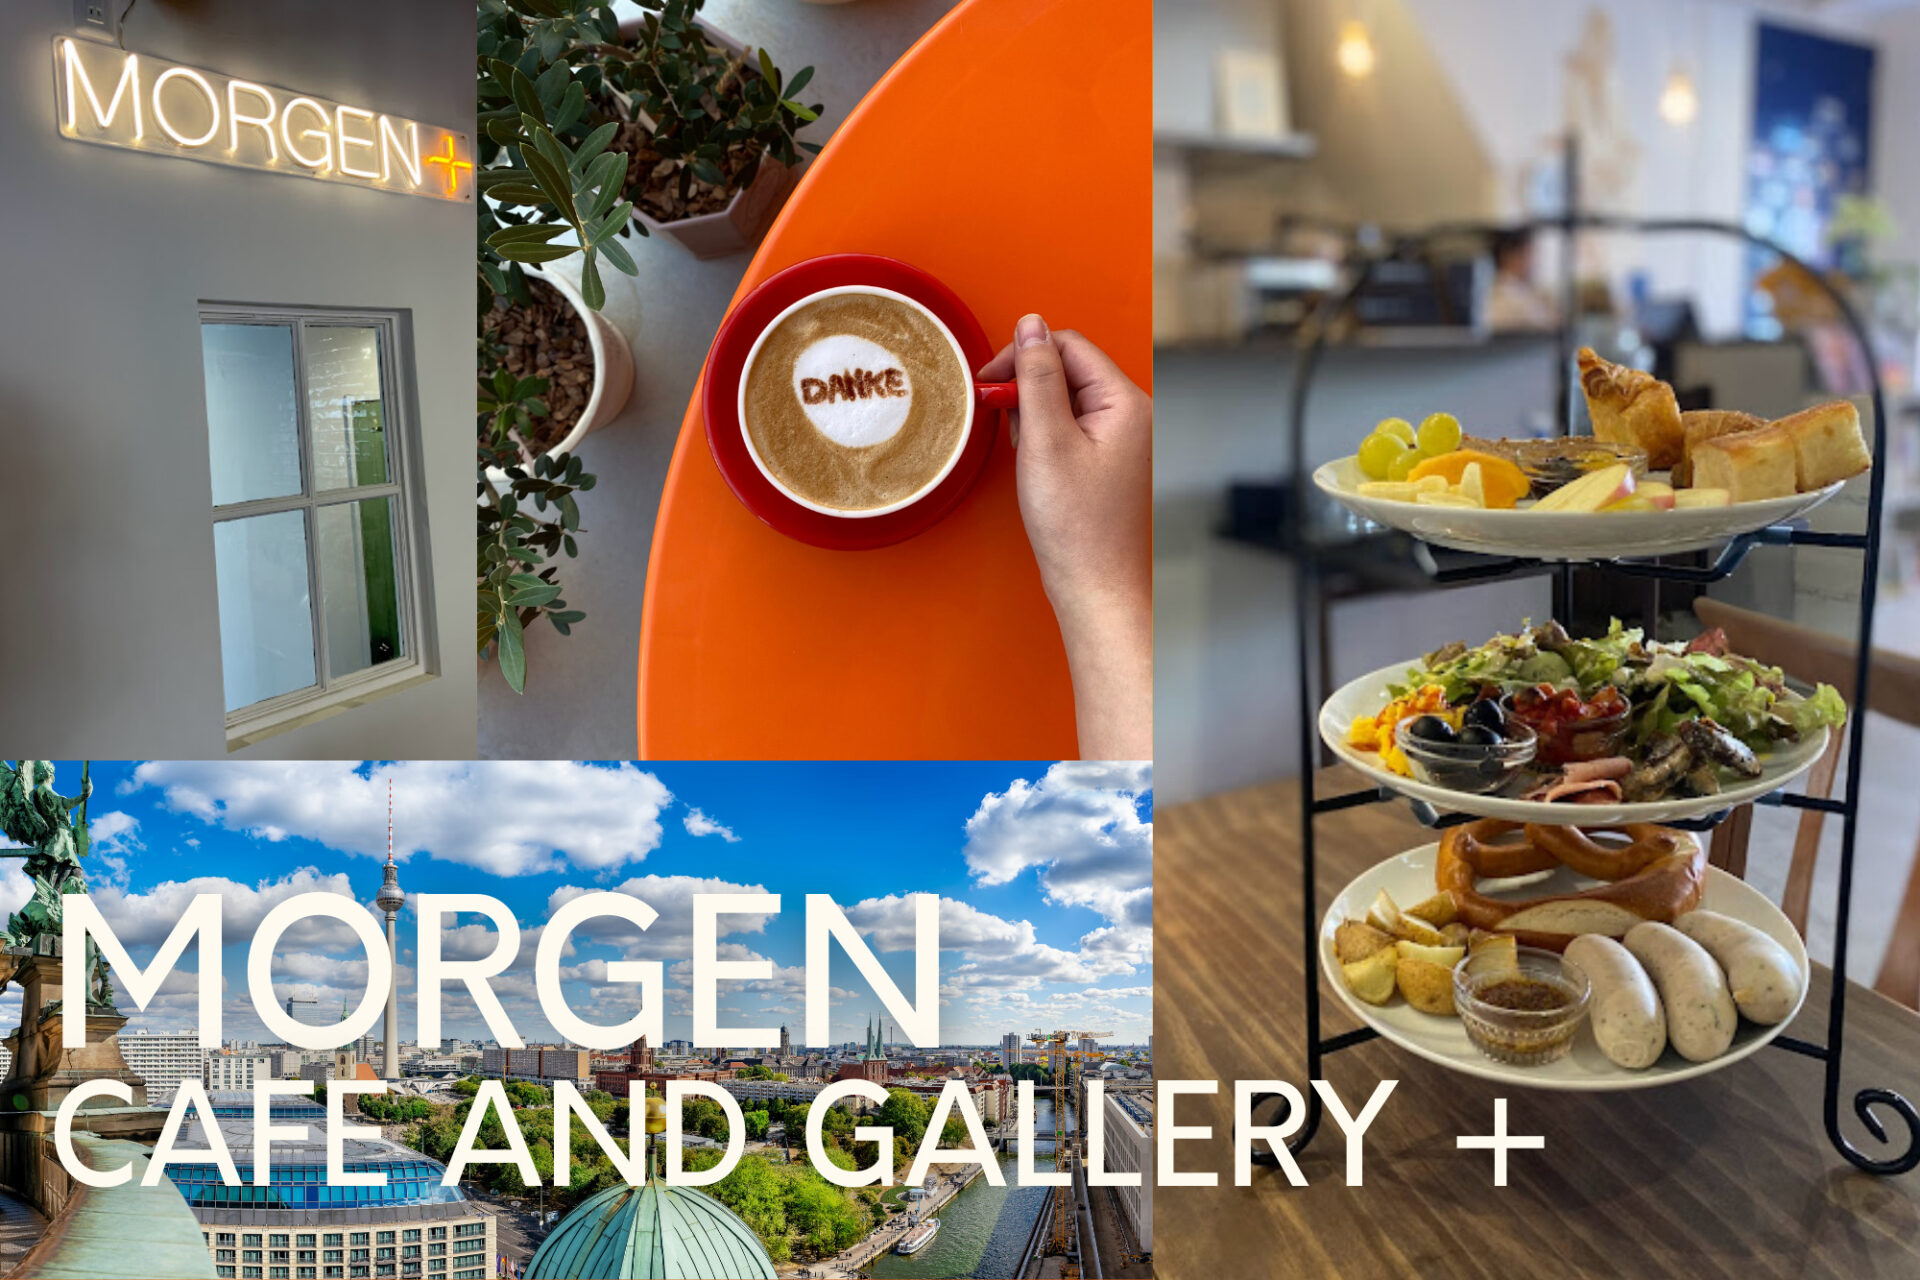 MORGEN cafe and gallery +